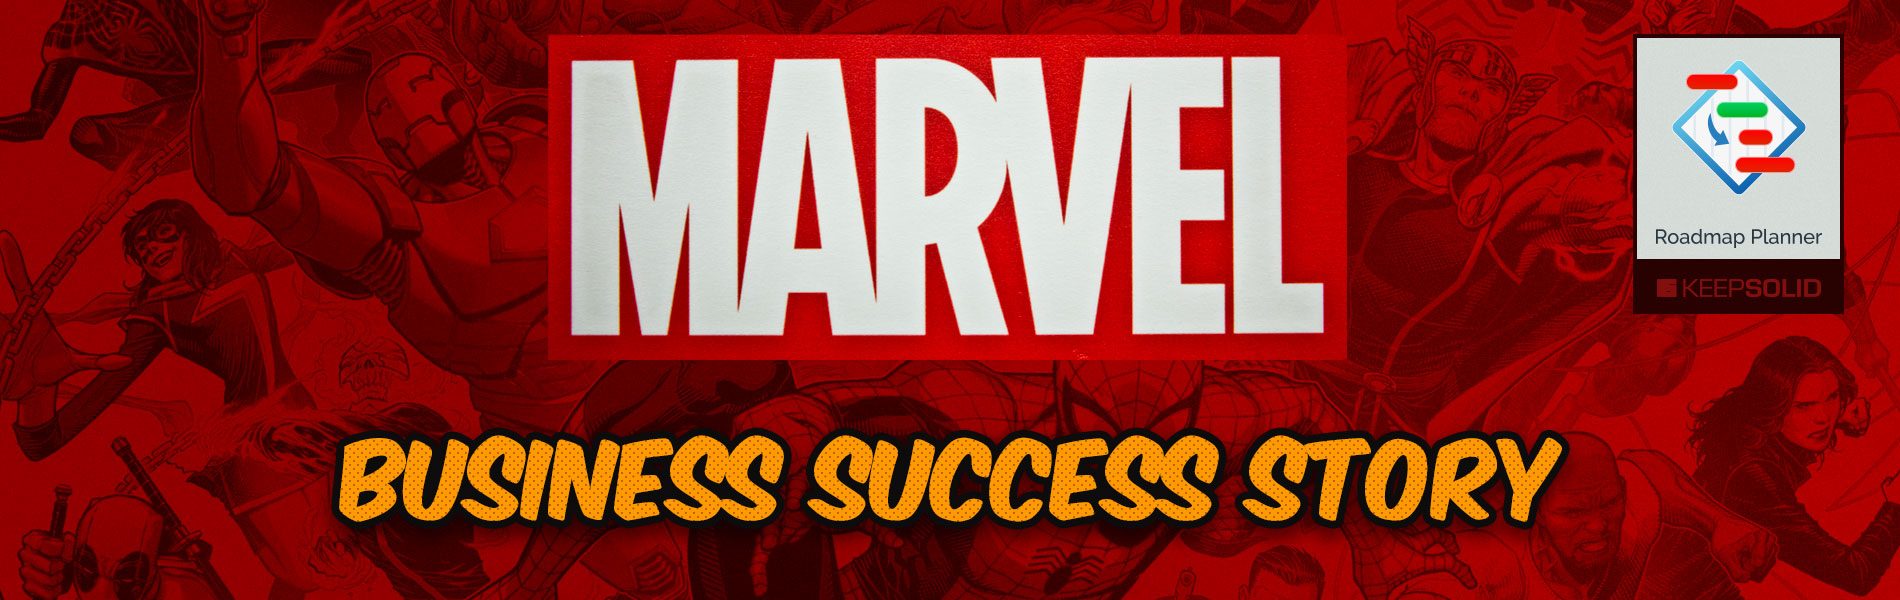 Marvel logo sign printed on banner. Learn business success story of Marvel Comics Group - a publisher of American comic books and related media